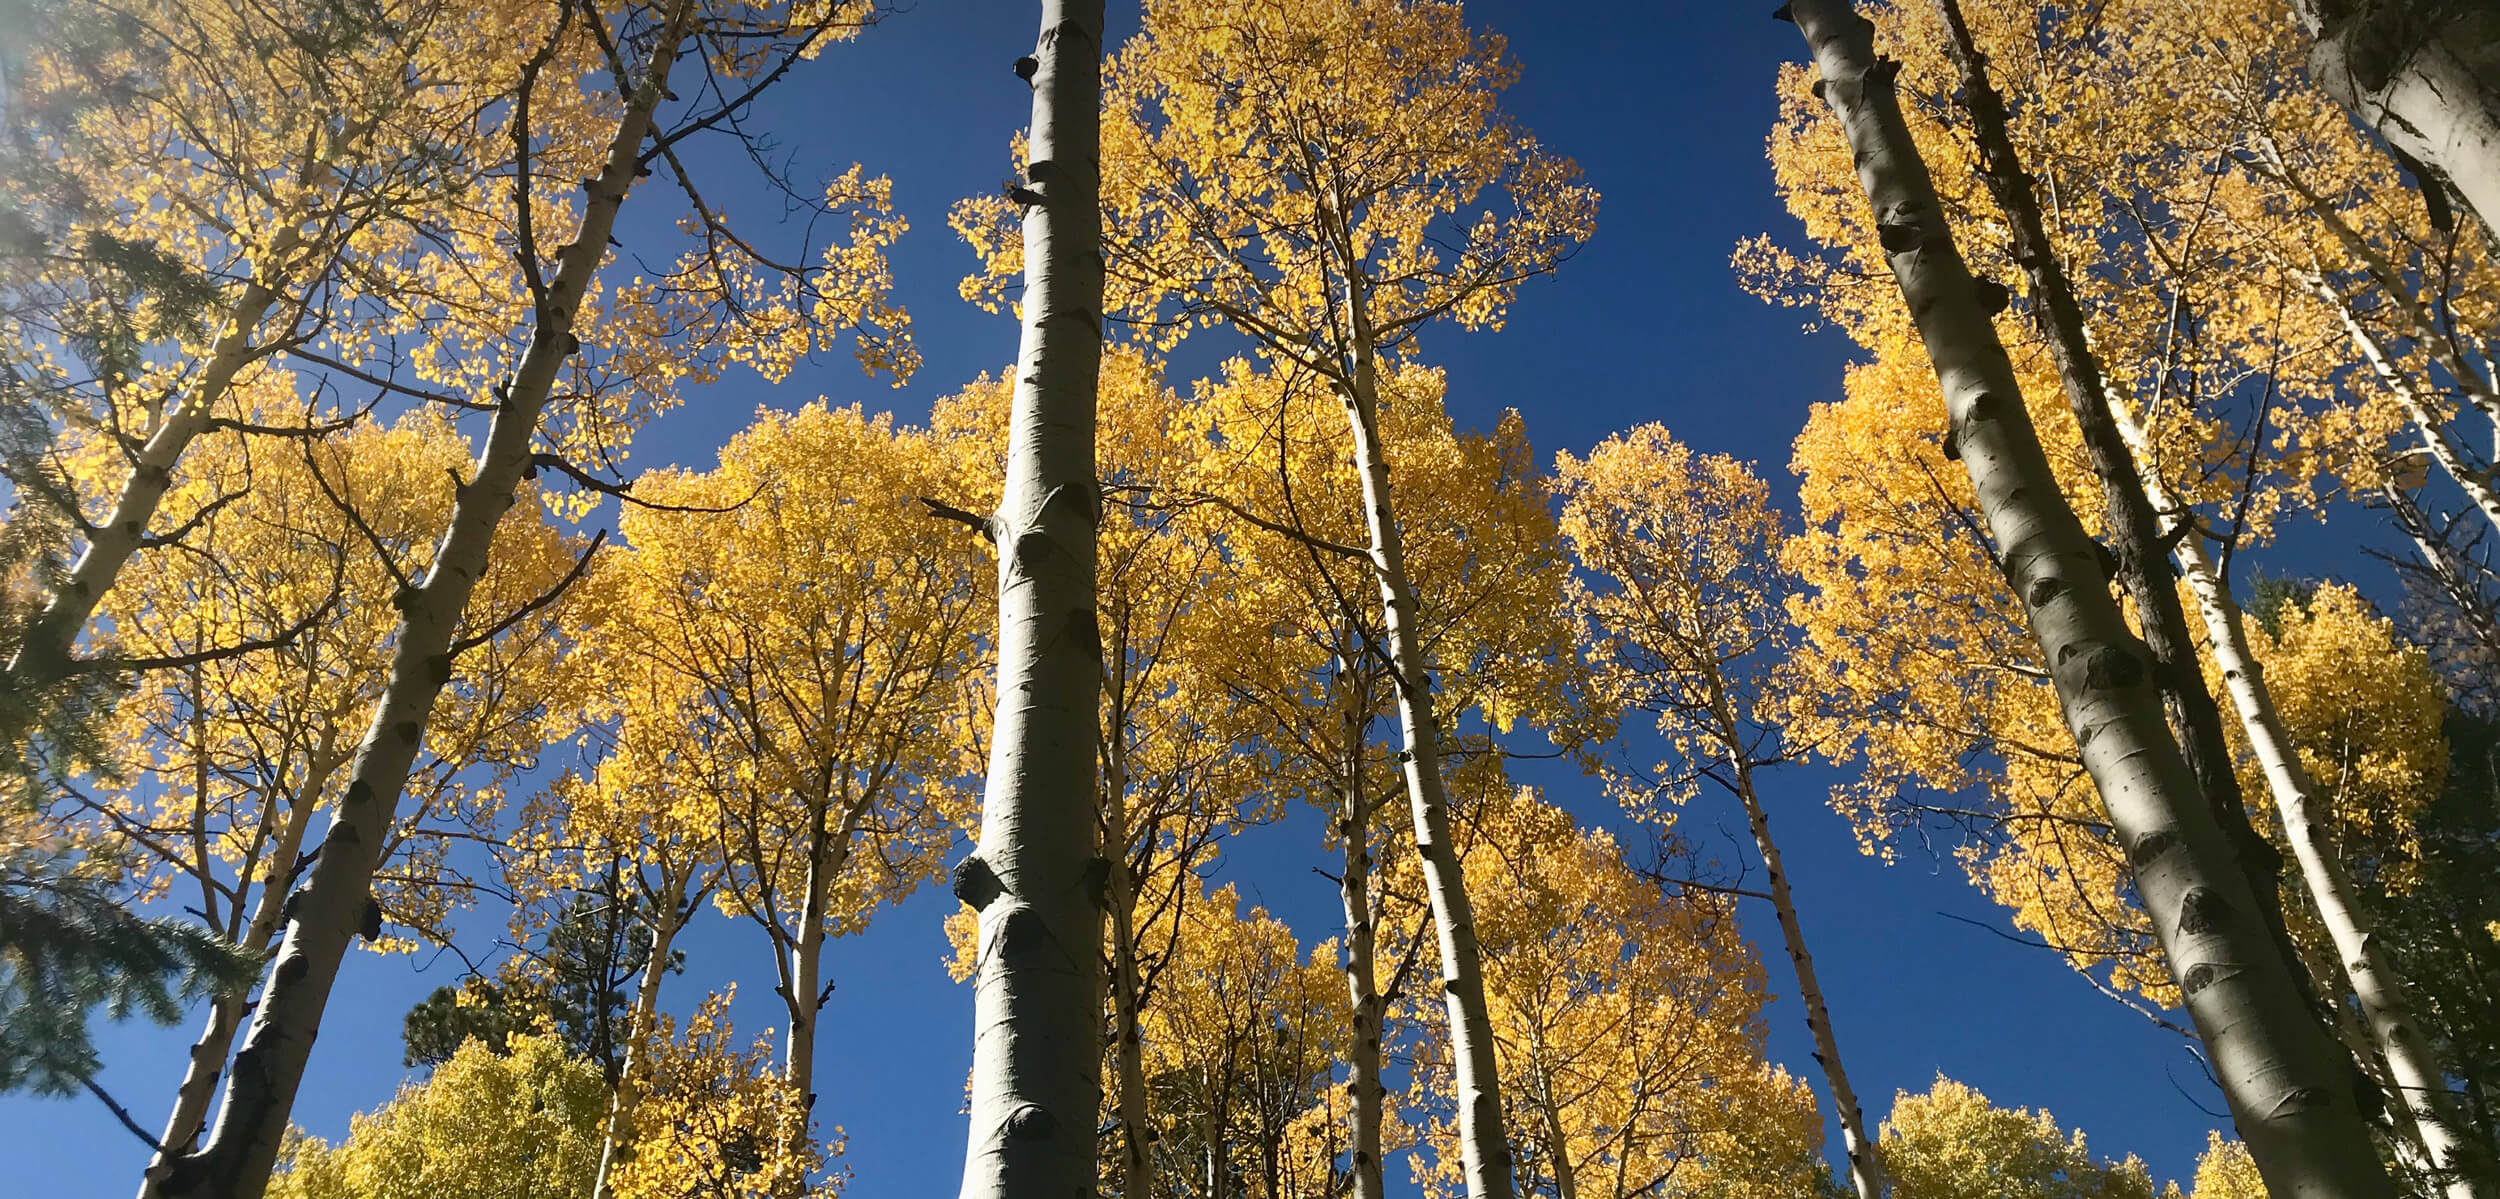 Aspen trees in autumn with yellow leaves in the San Francisco Peaks in Flagstaff Arizona